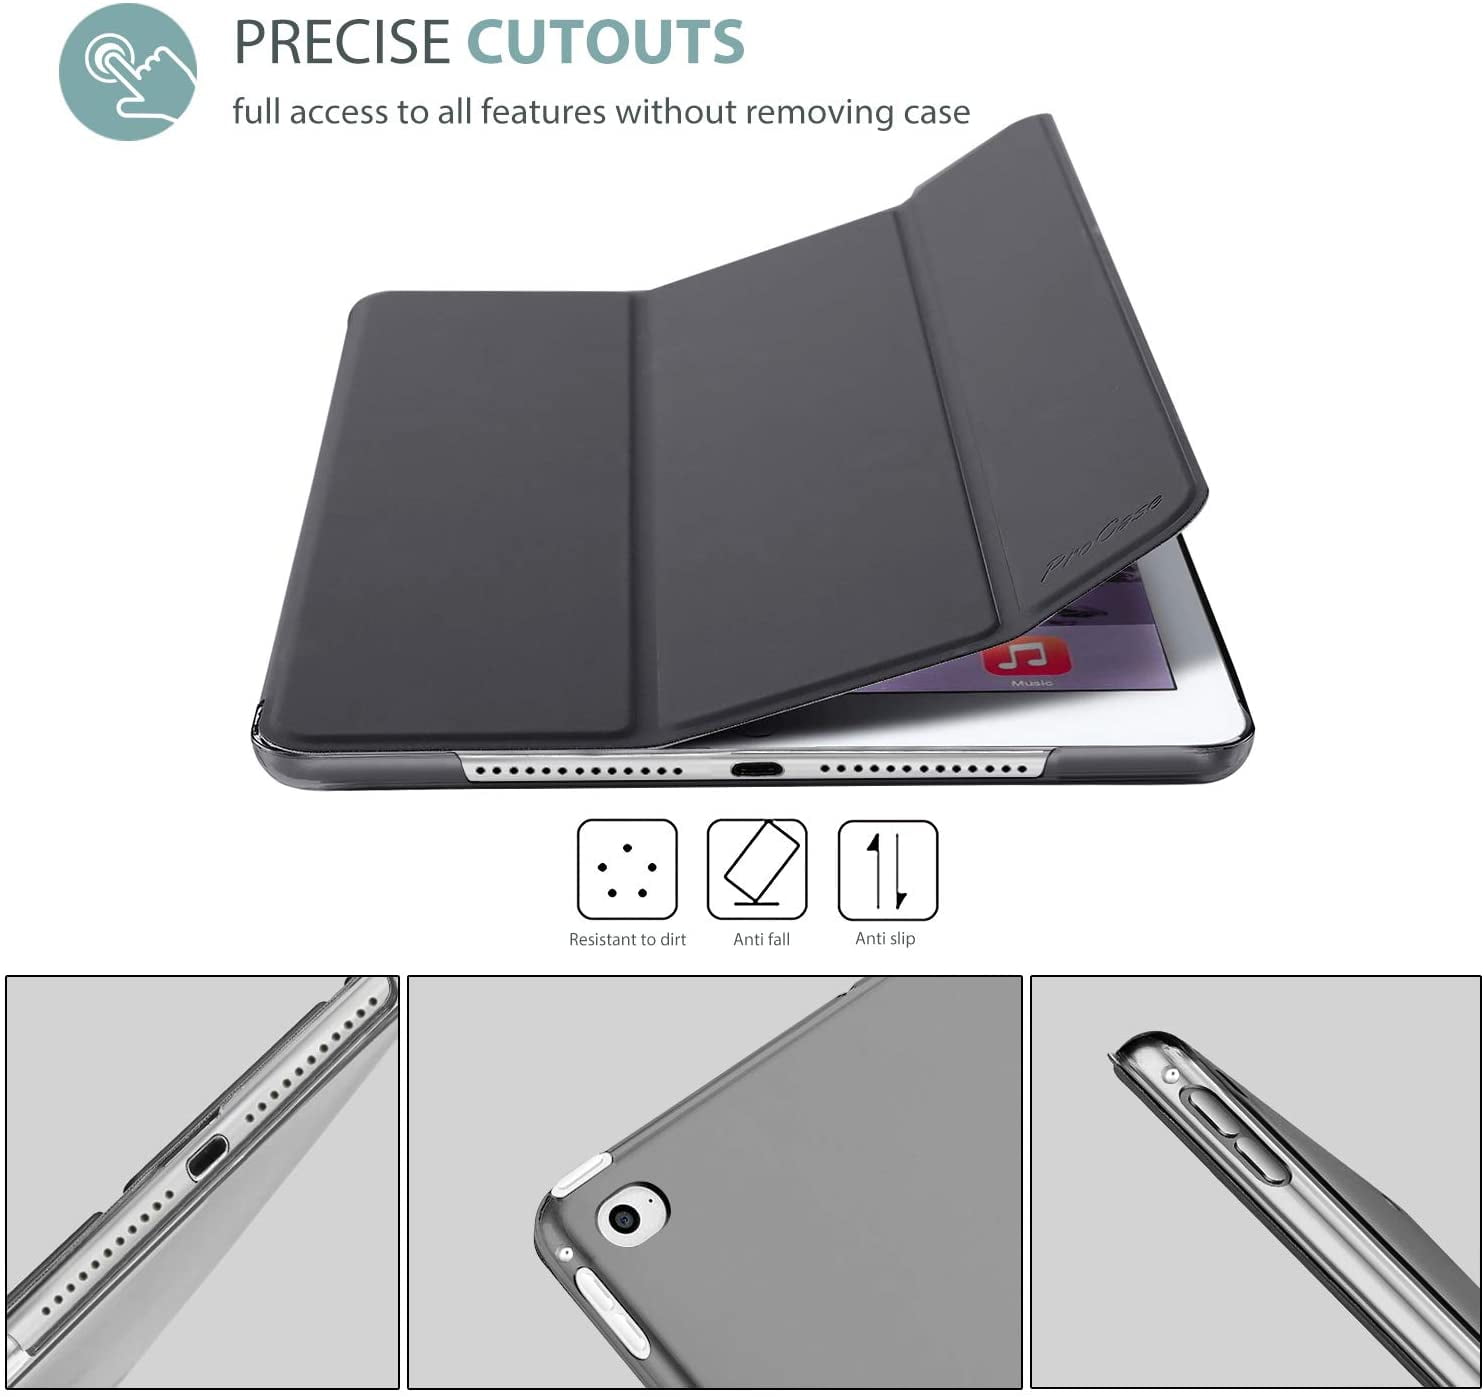 Ultra Slim Lightweight Stand Protective Case Shell with Translucent Frosted Back Cover for Apple iPad Air 2 -Grey 2014 Release A1566 A1567 ProCase Smart Case for iPad Air 2